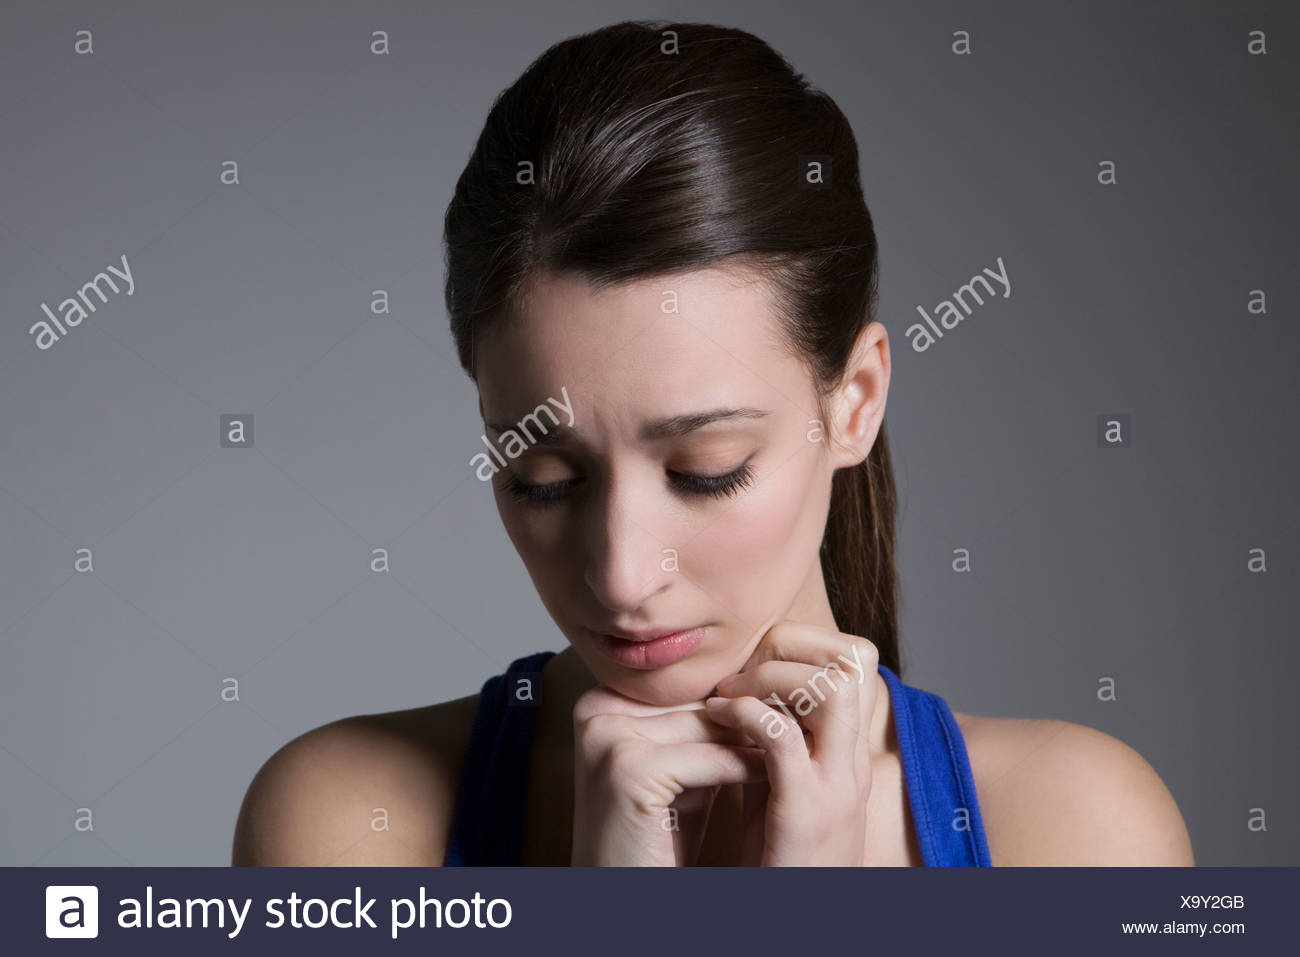 Head Tilted Down High Resolution Stock Photography And Images Alamy